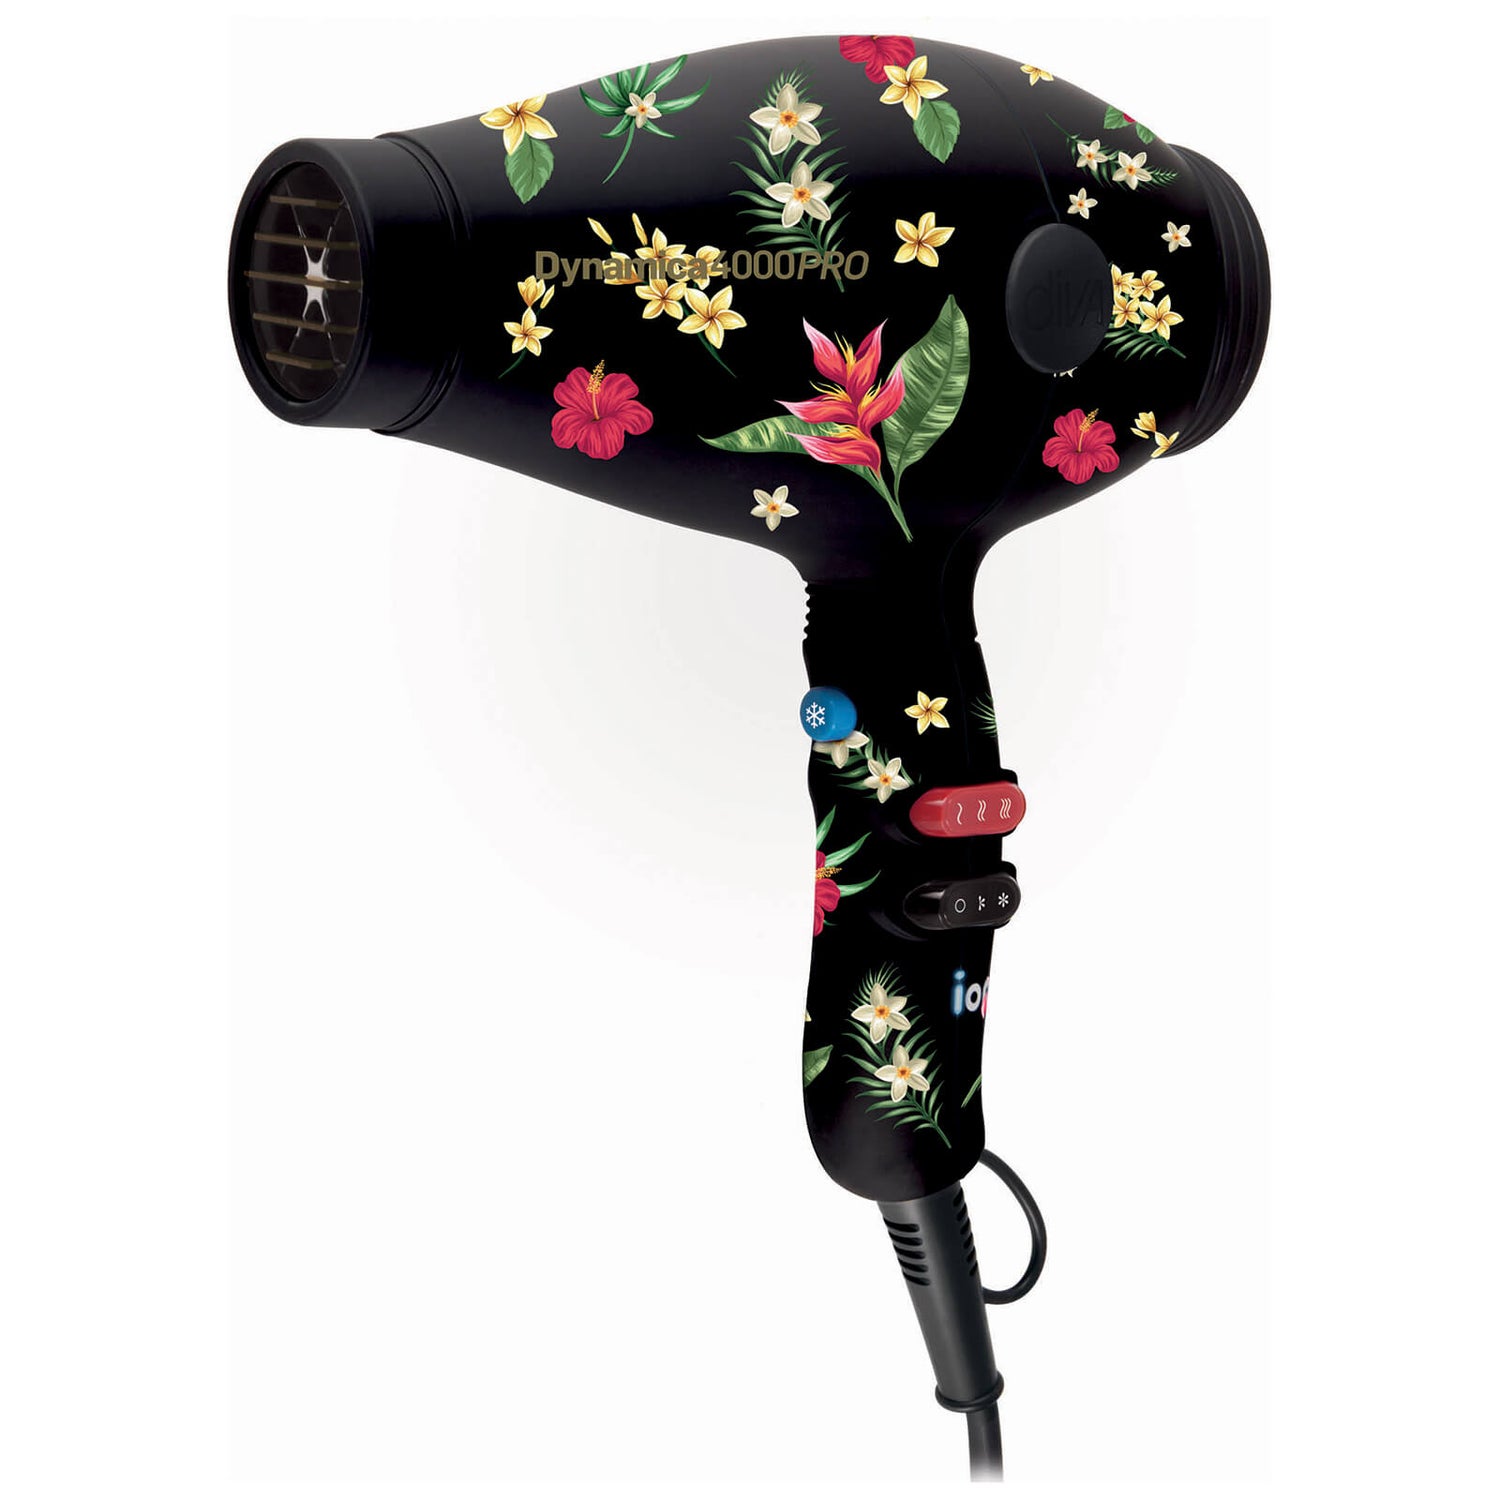 Diva Professional Styling Rebel Dynamica 4000 Pro Tropical Burst - FREE  Delivery